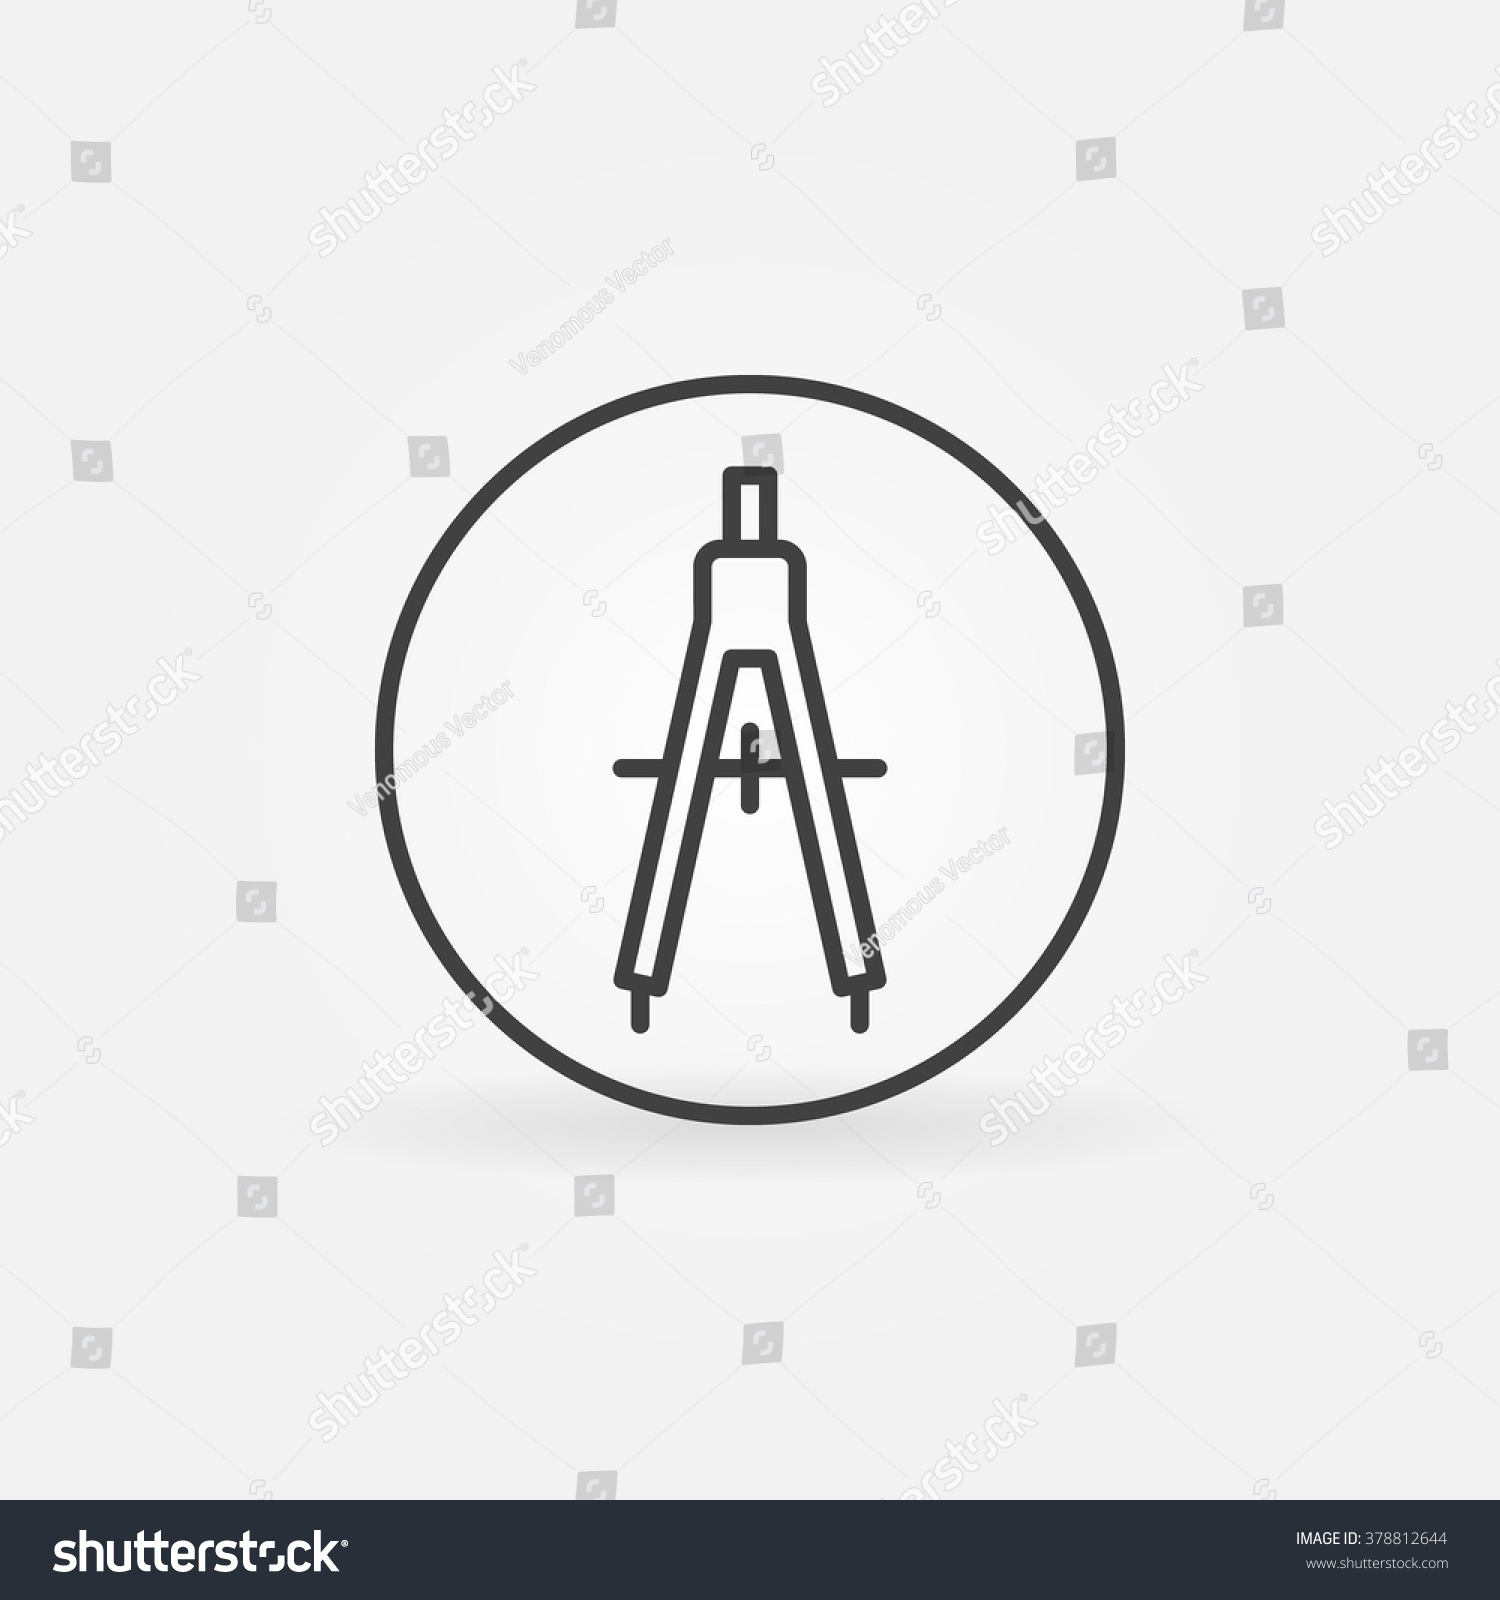 Compasses Concept Icon Vector Linear Drawing Stock Vector 378812644 ...